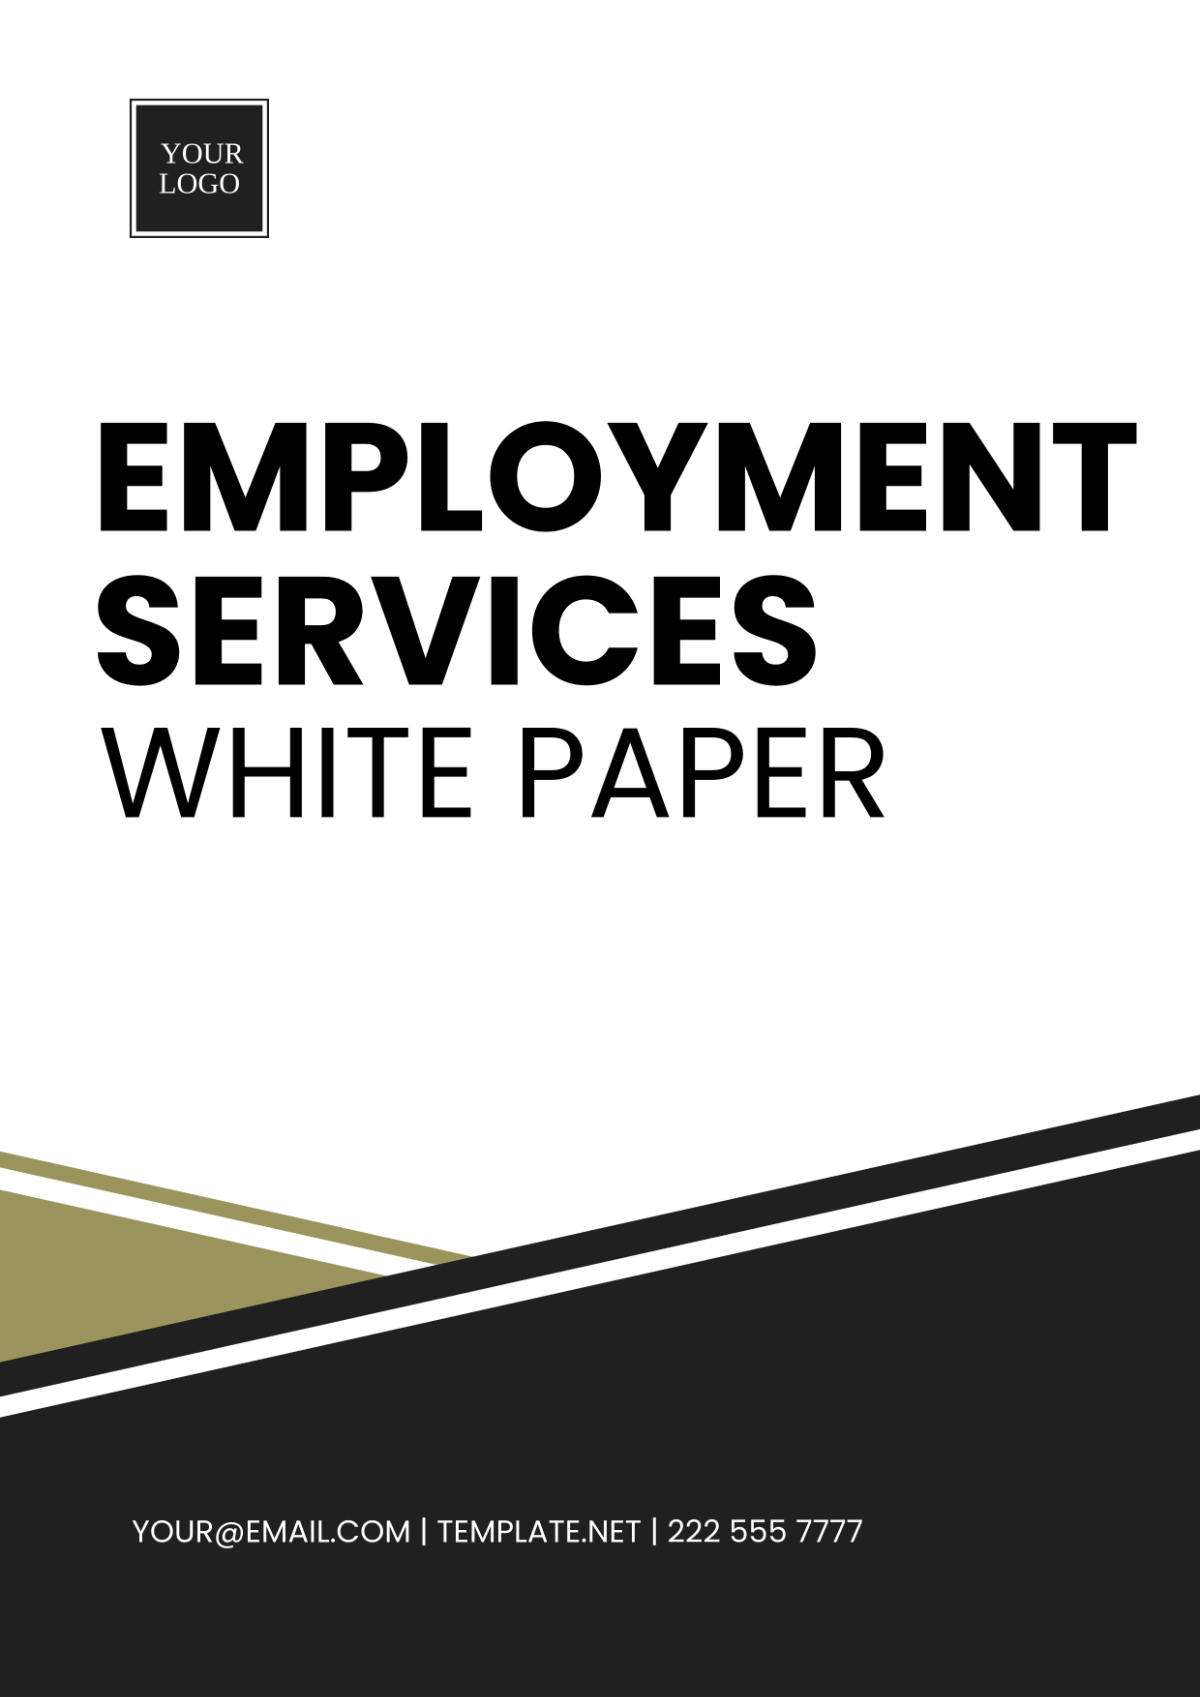 Employment Services White Paper Template